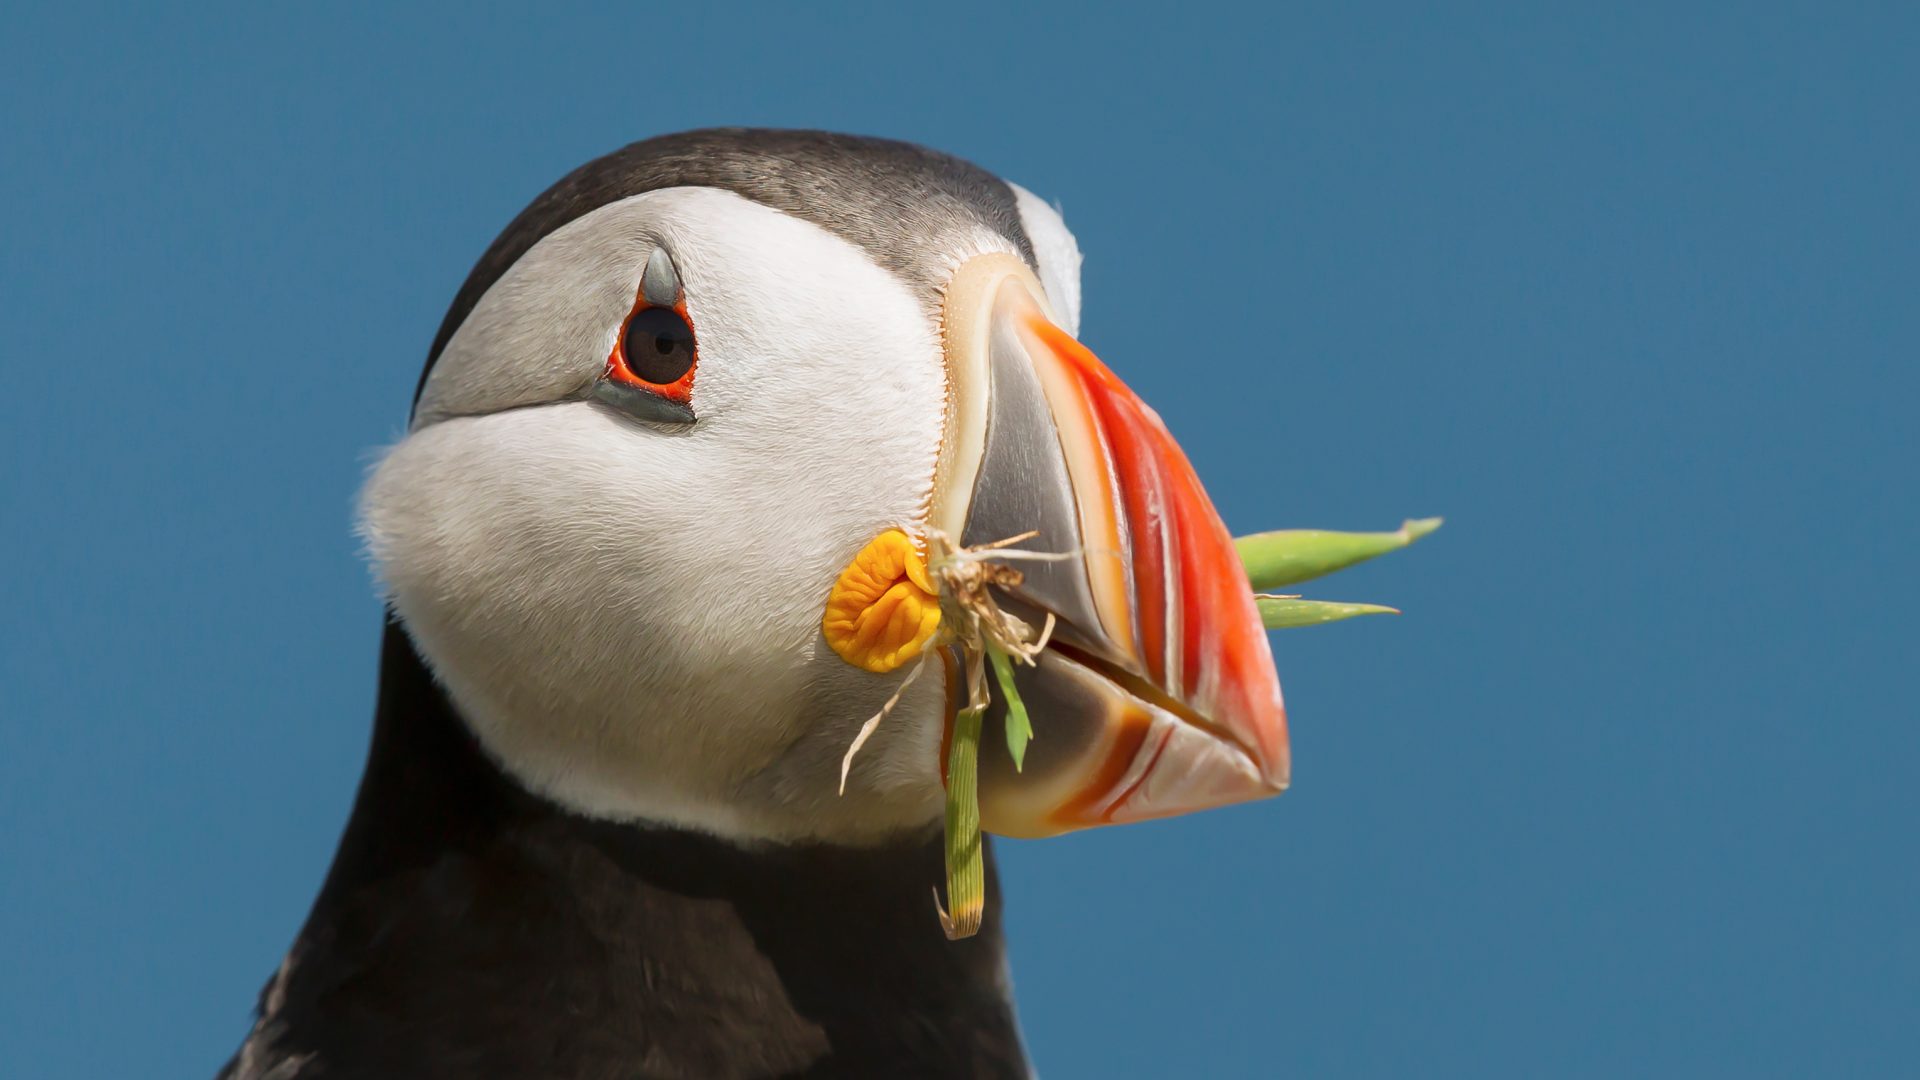 Close-up Of Atlantic Puffin with Nesting Material in its beak